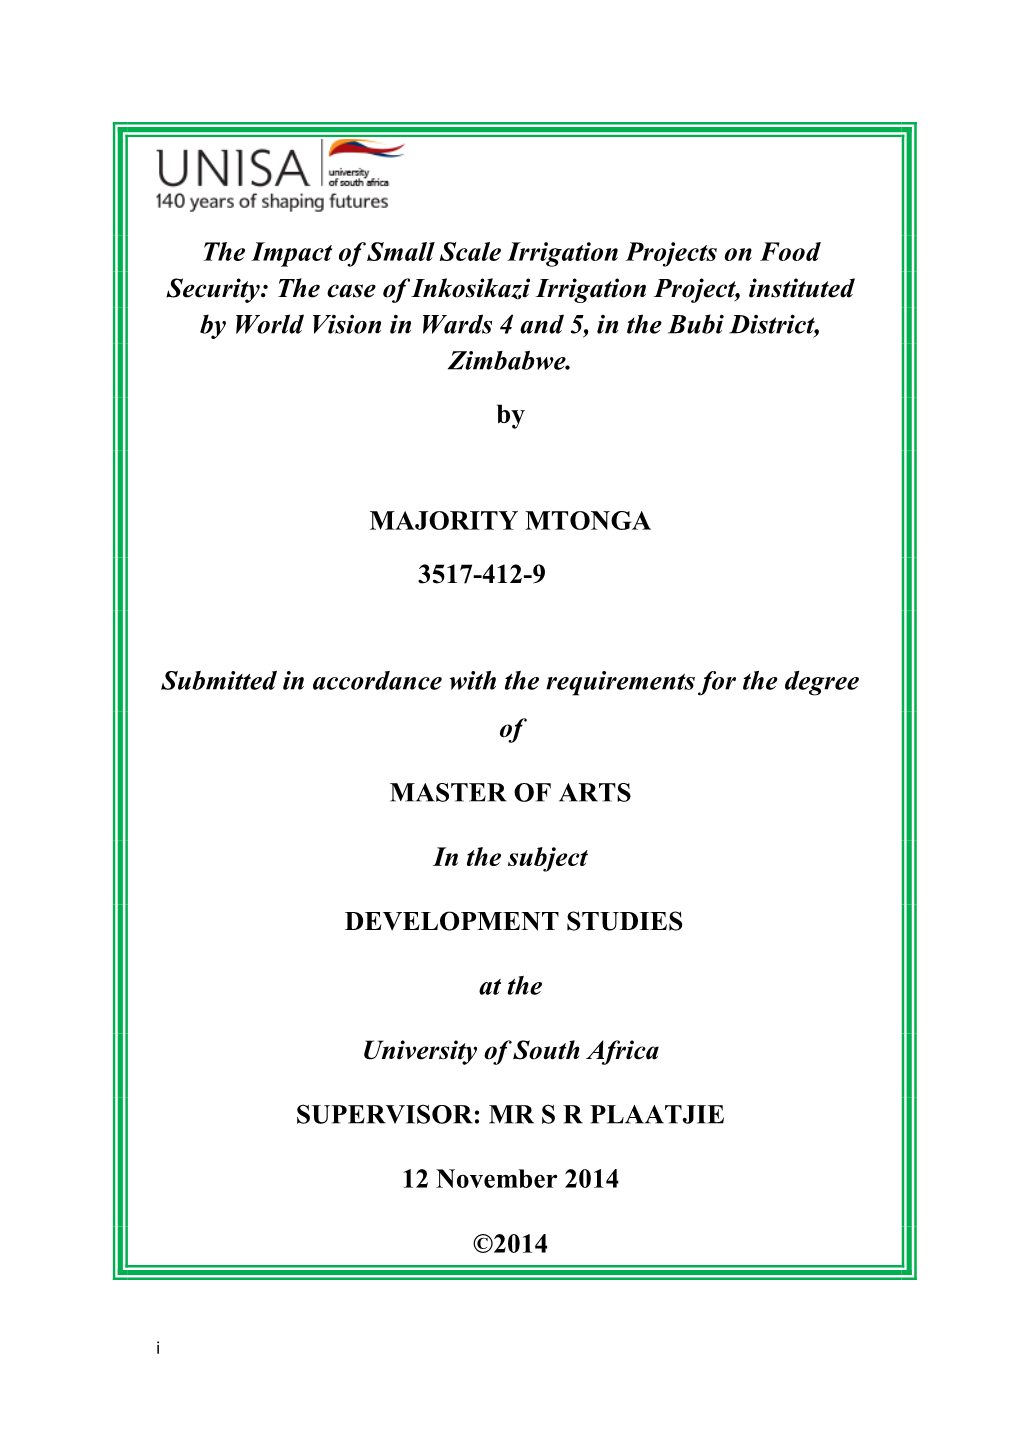 The Impact of Small Scale Irrigation Projects on Food Security